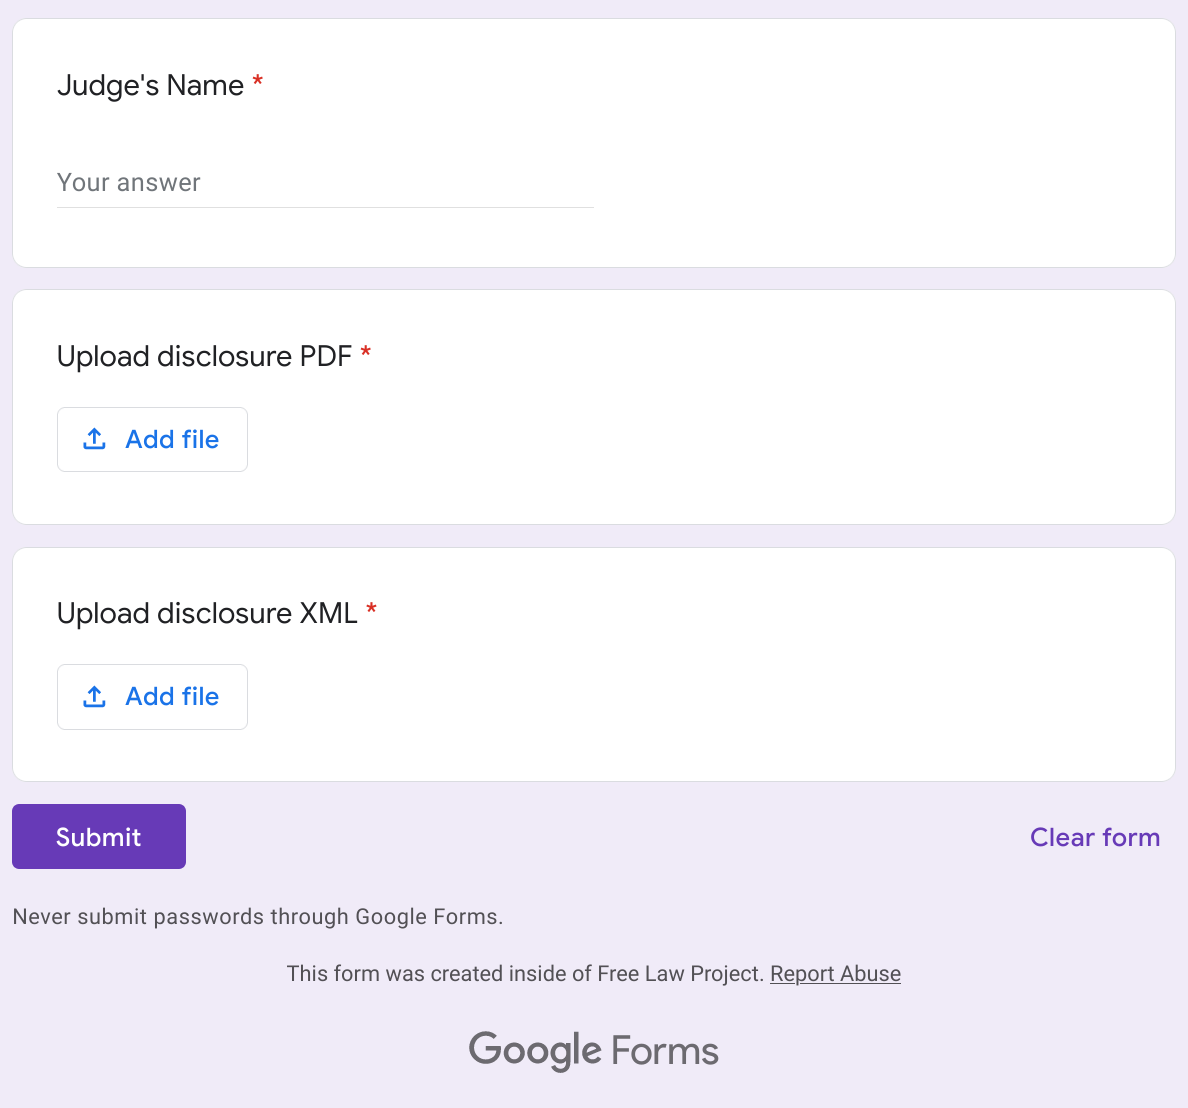 A screenshot of a Google Form showing three fields, one for the judge's name, one to upload a PDF and a third to upload XML